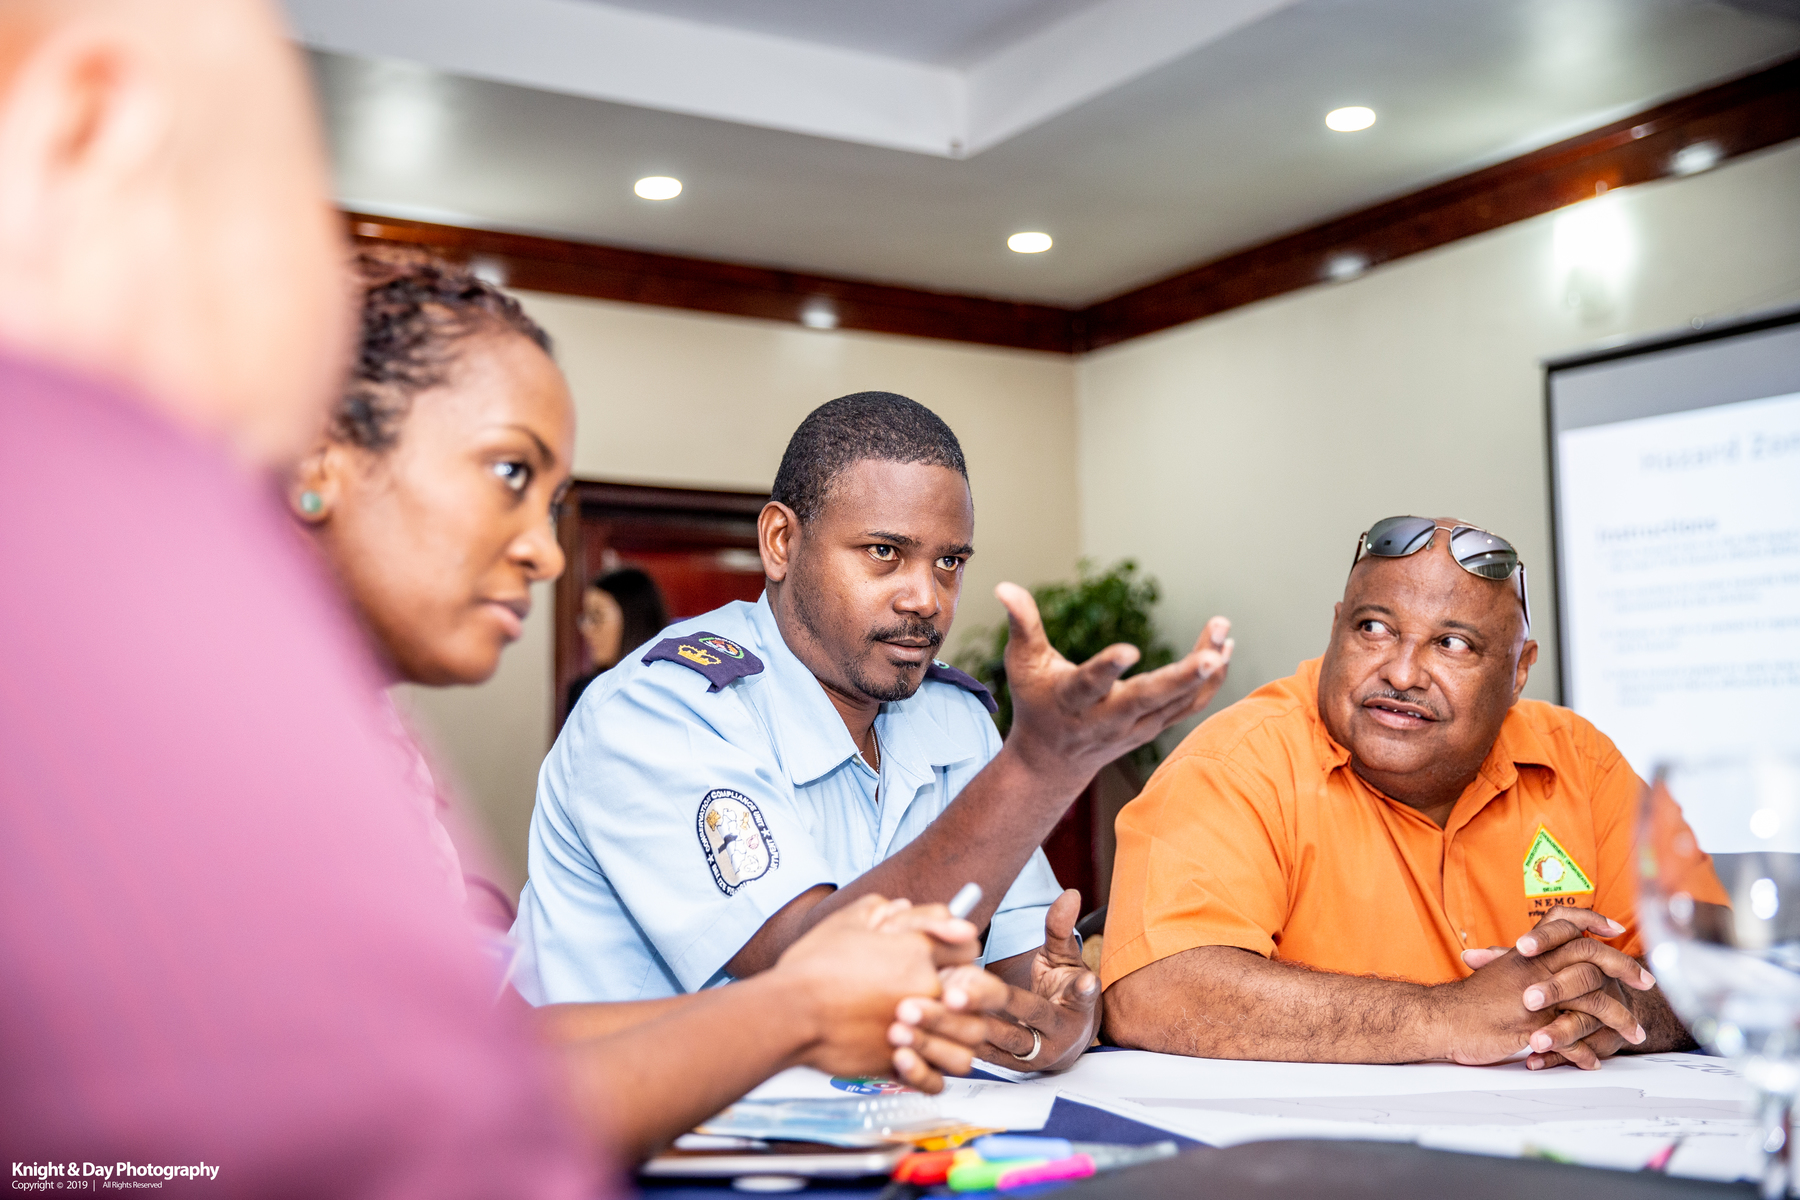 Belize disaster management professionals discuss a mapping exercise at the NDPBA kick off